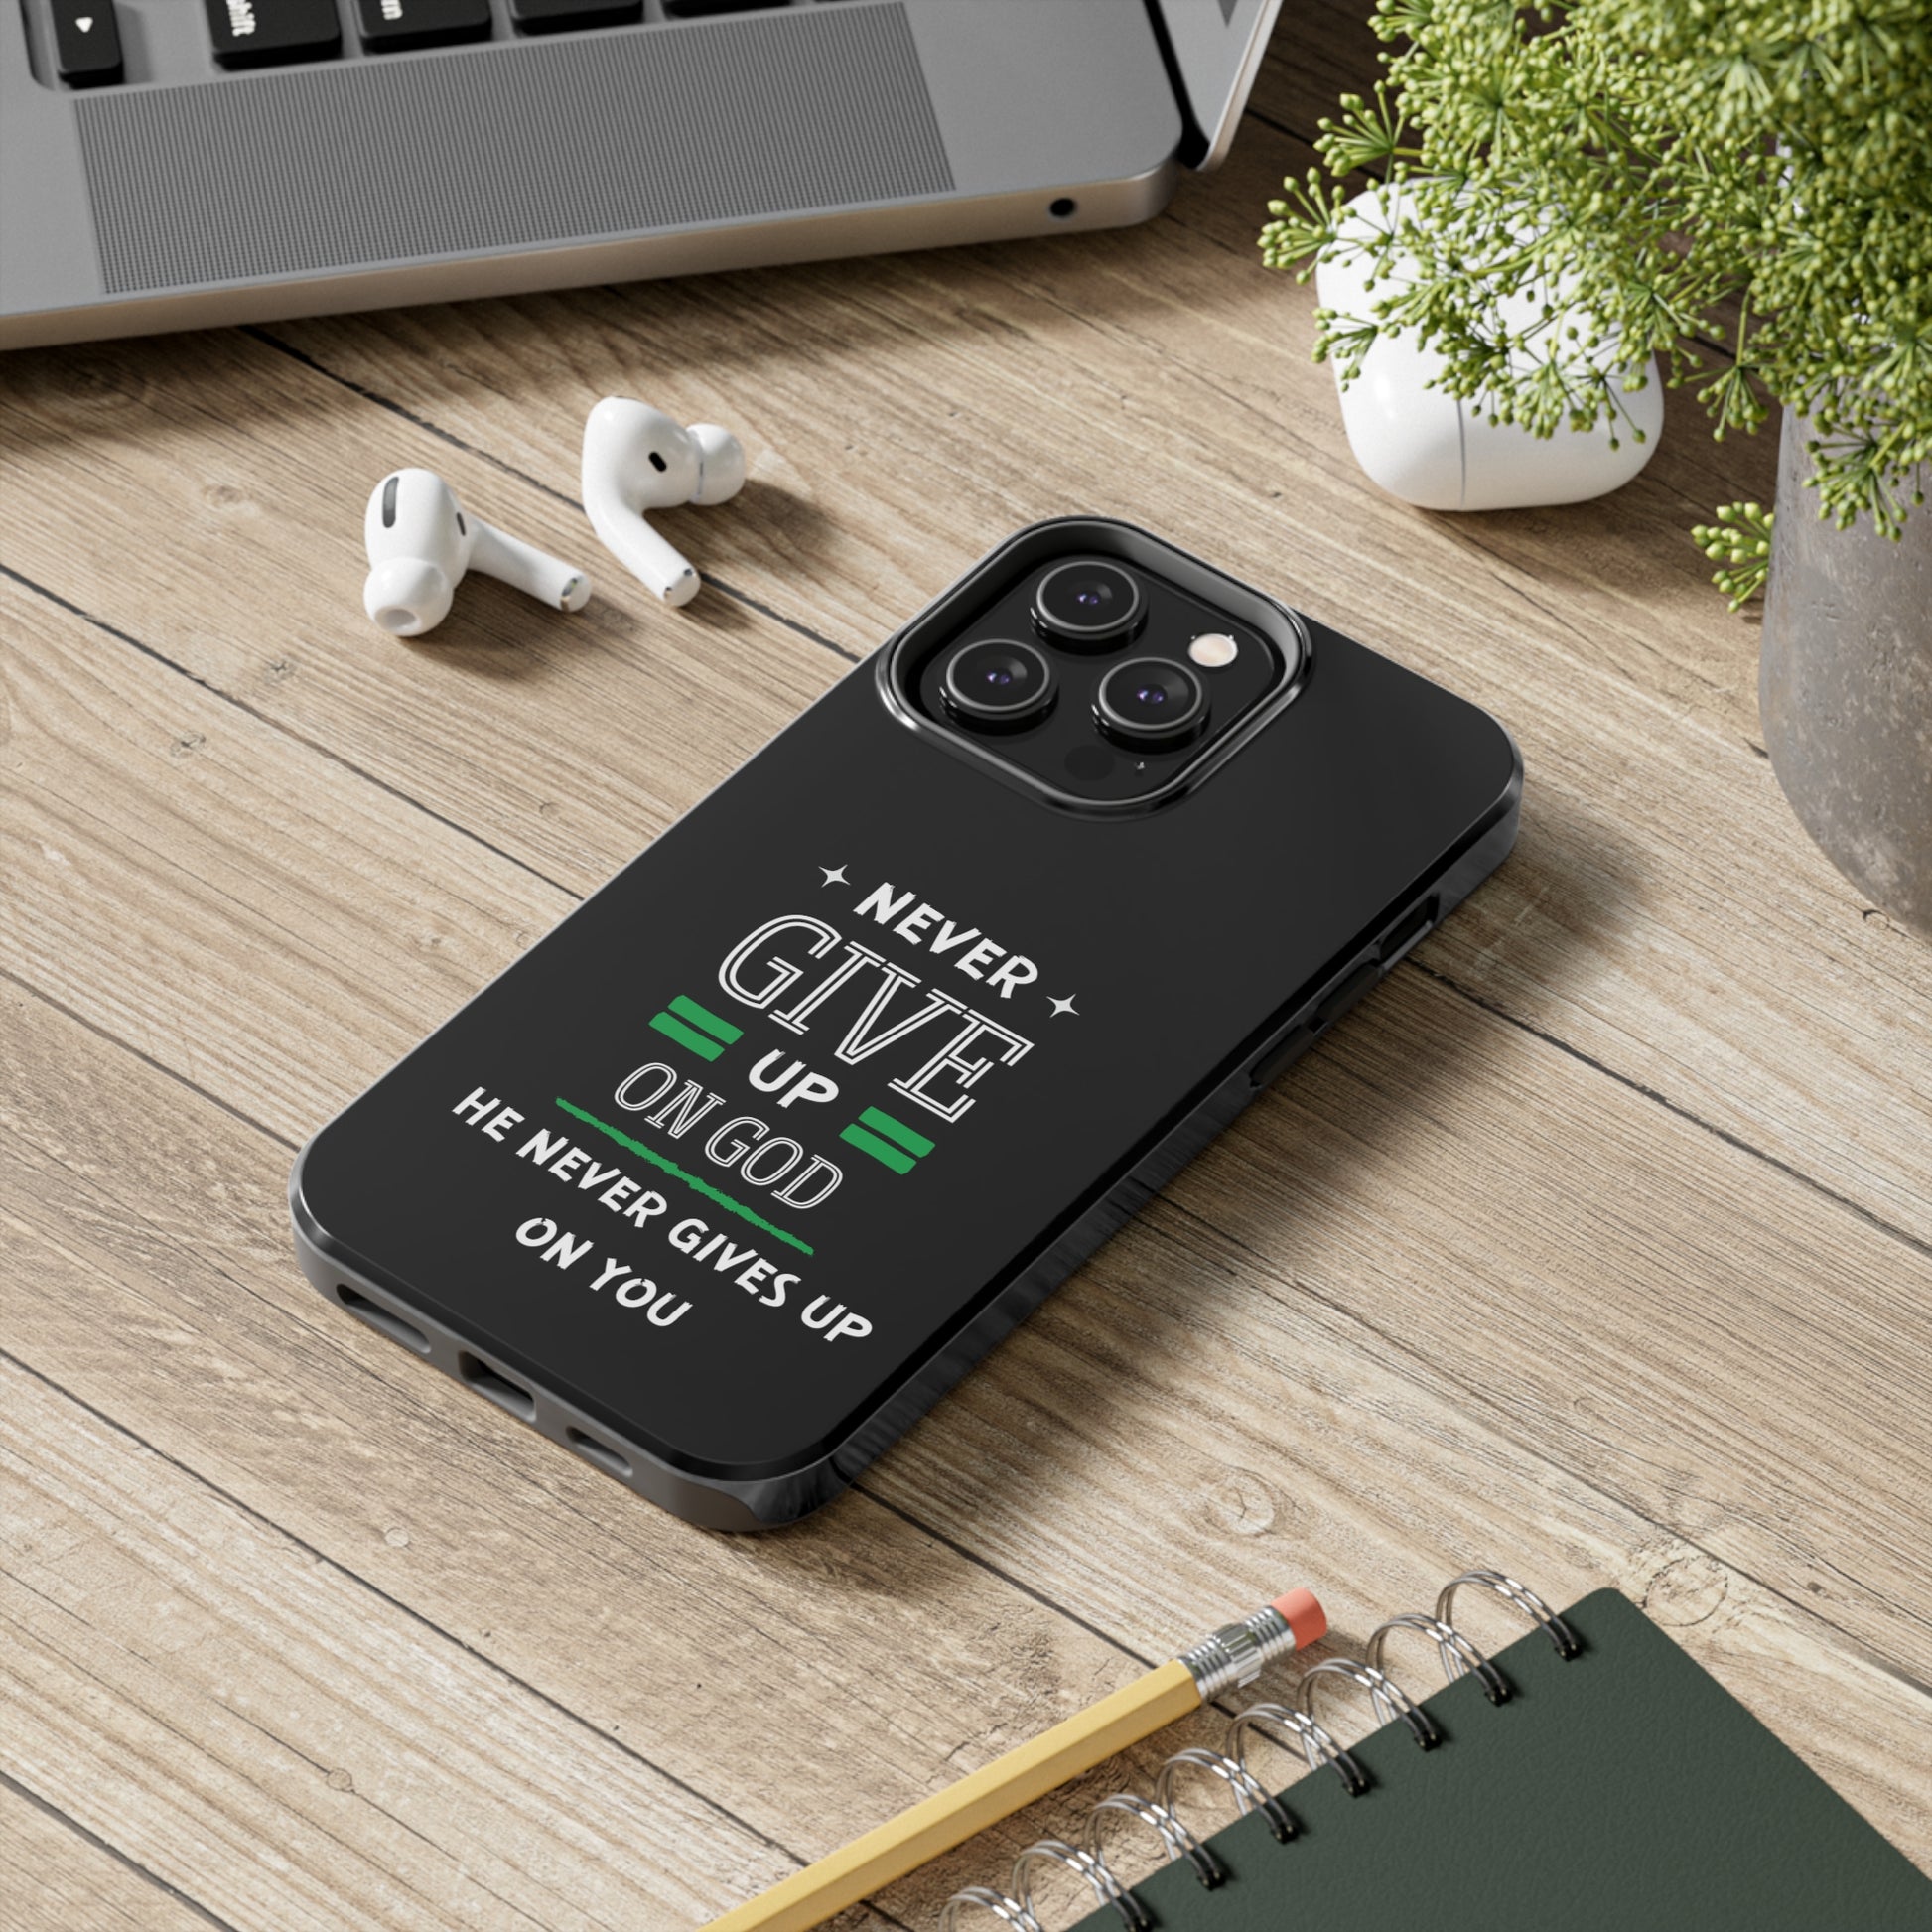 Never Give Up On God He Never Gives Up On You Christian Phone Tough Phone Cases, Case-Mate Printify